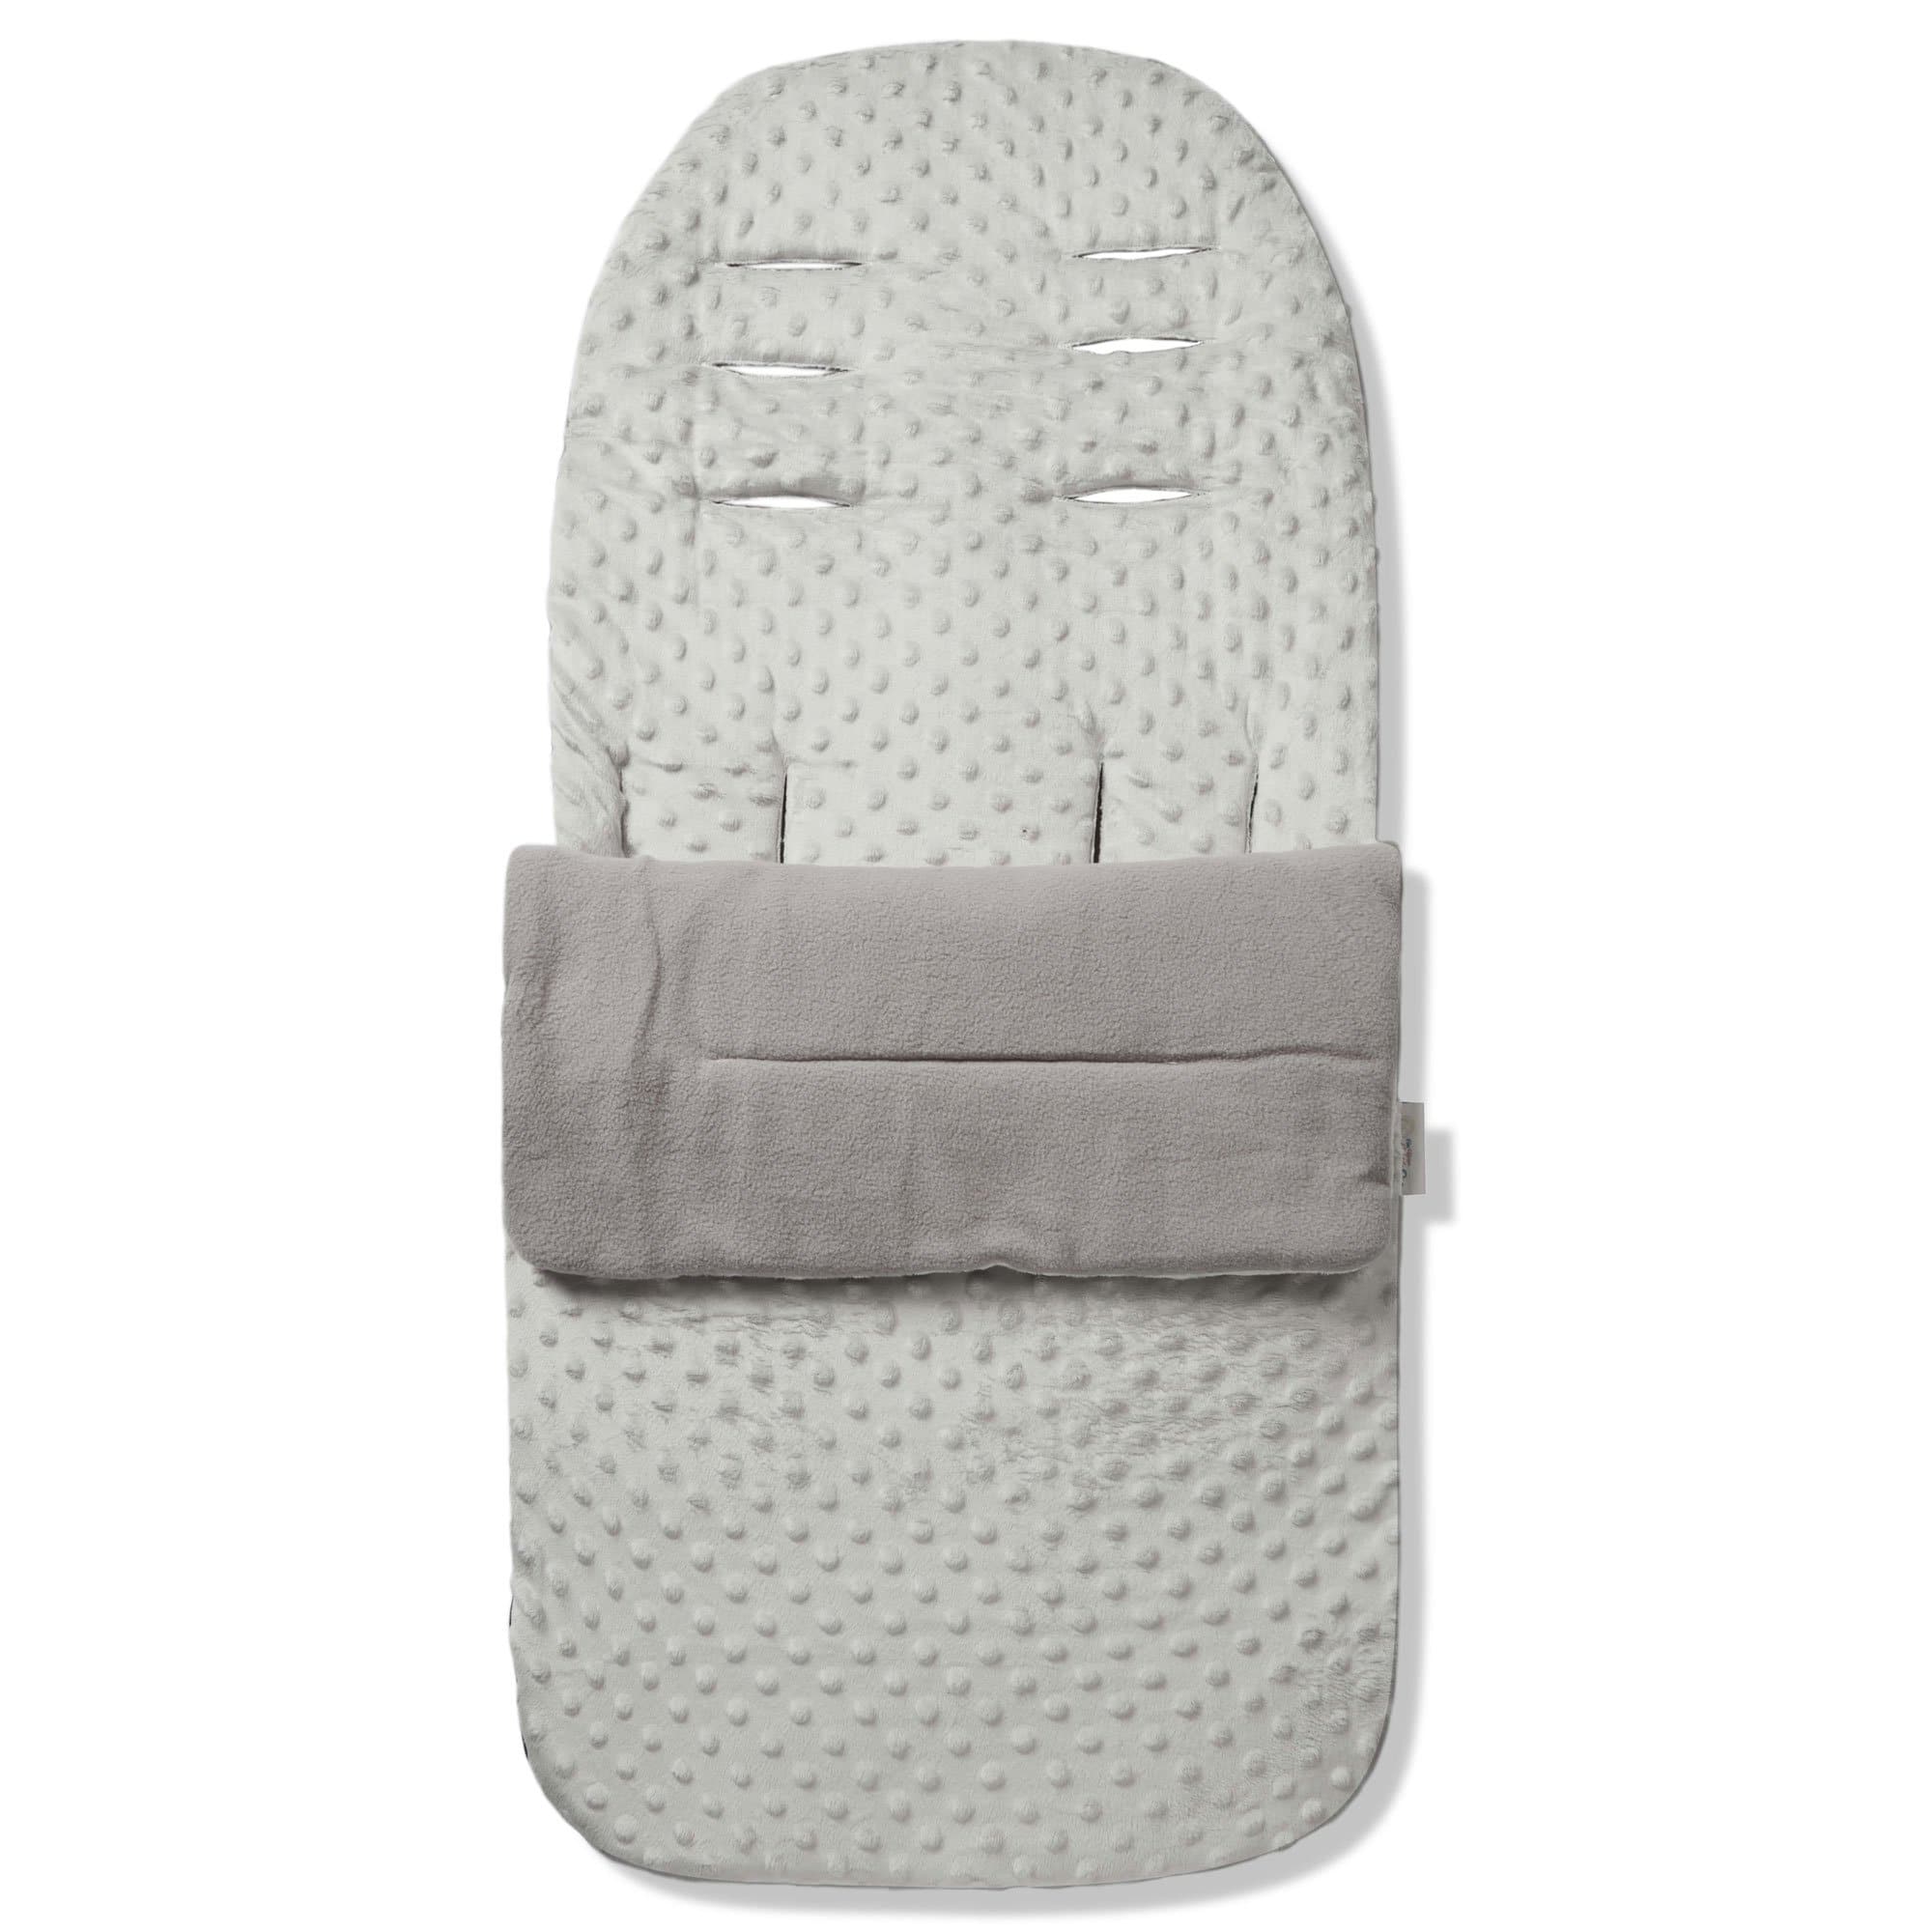 Dimple Footmuff / Cosy Toes Compatible with My Babiie - For Your Little One